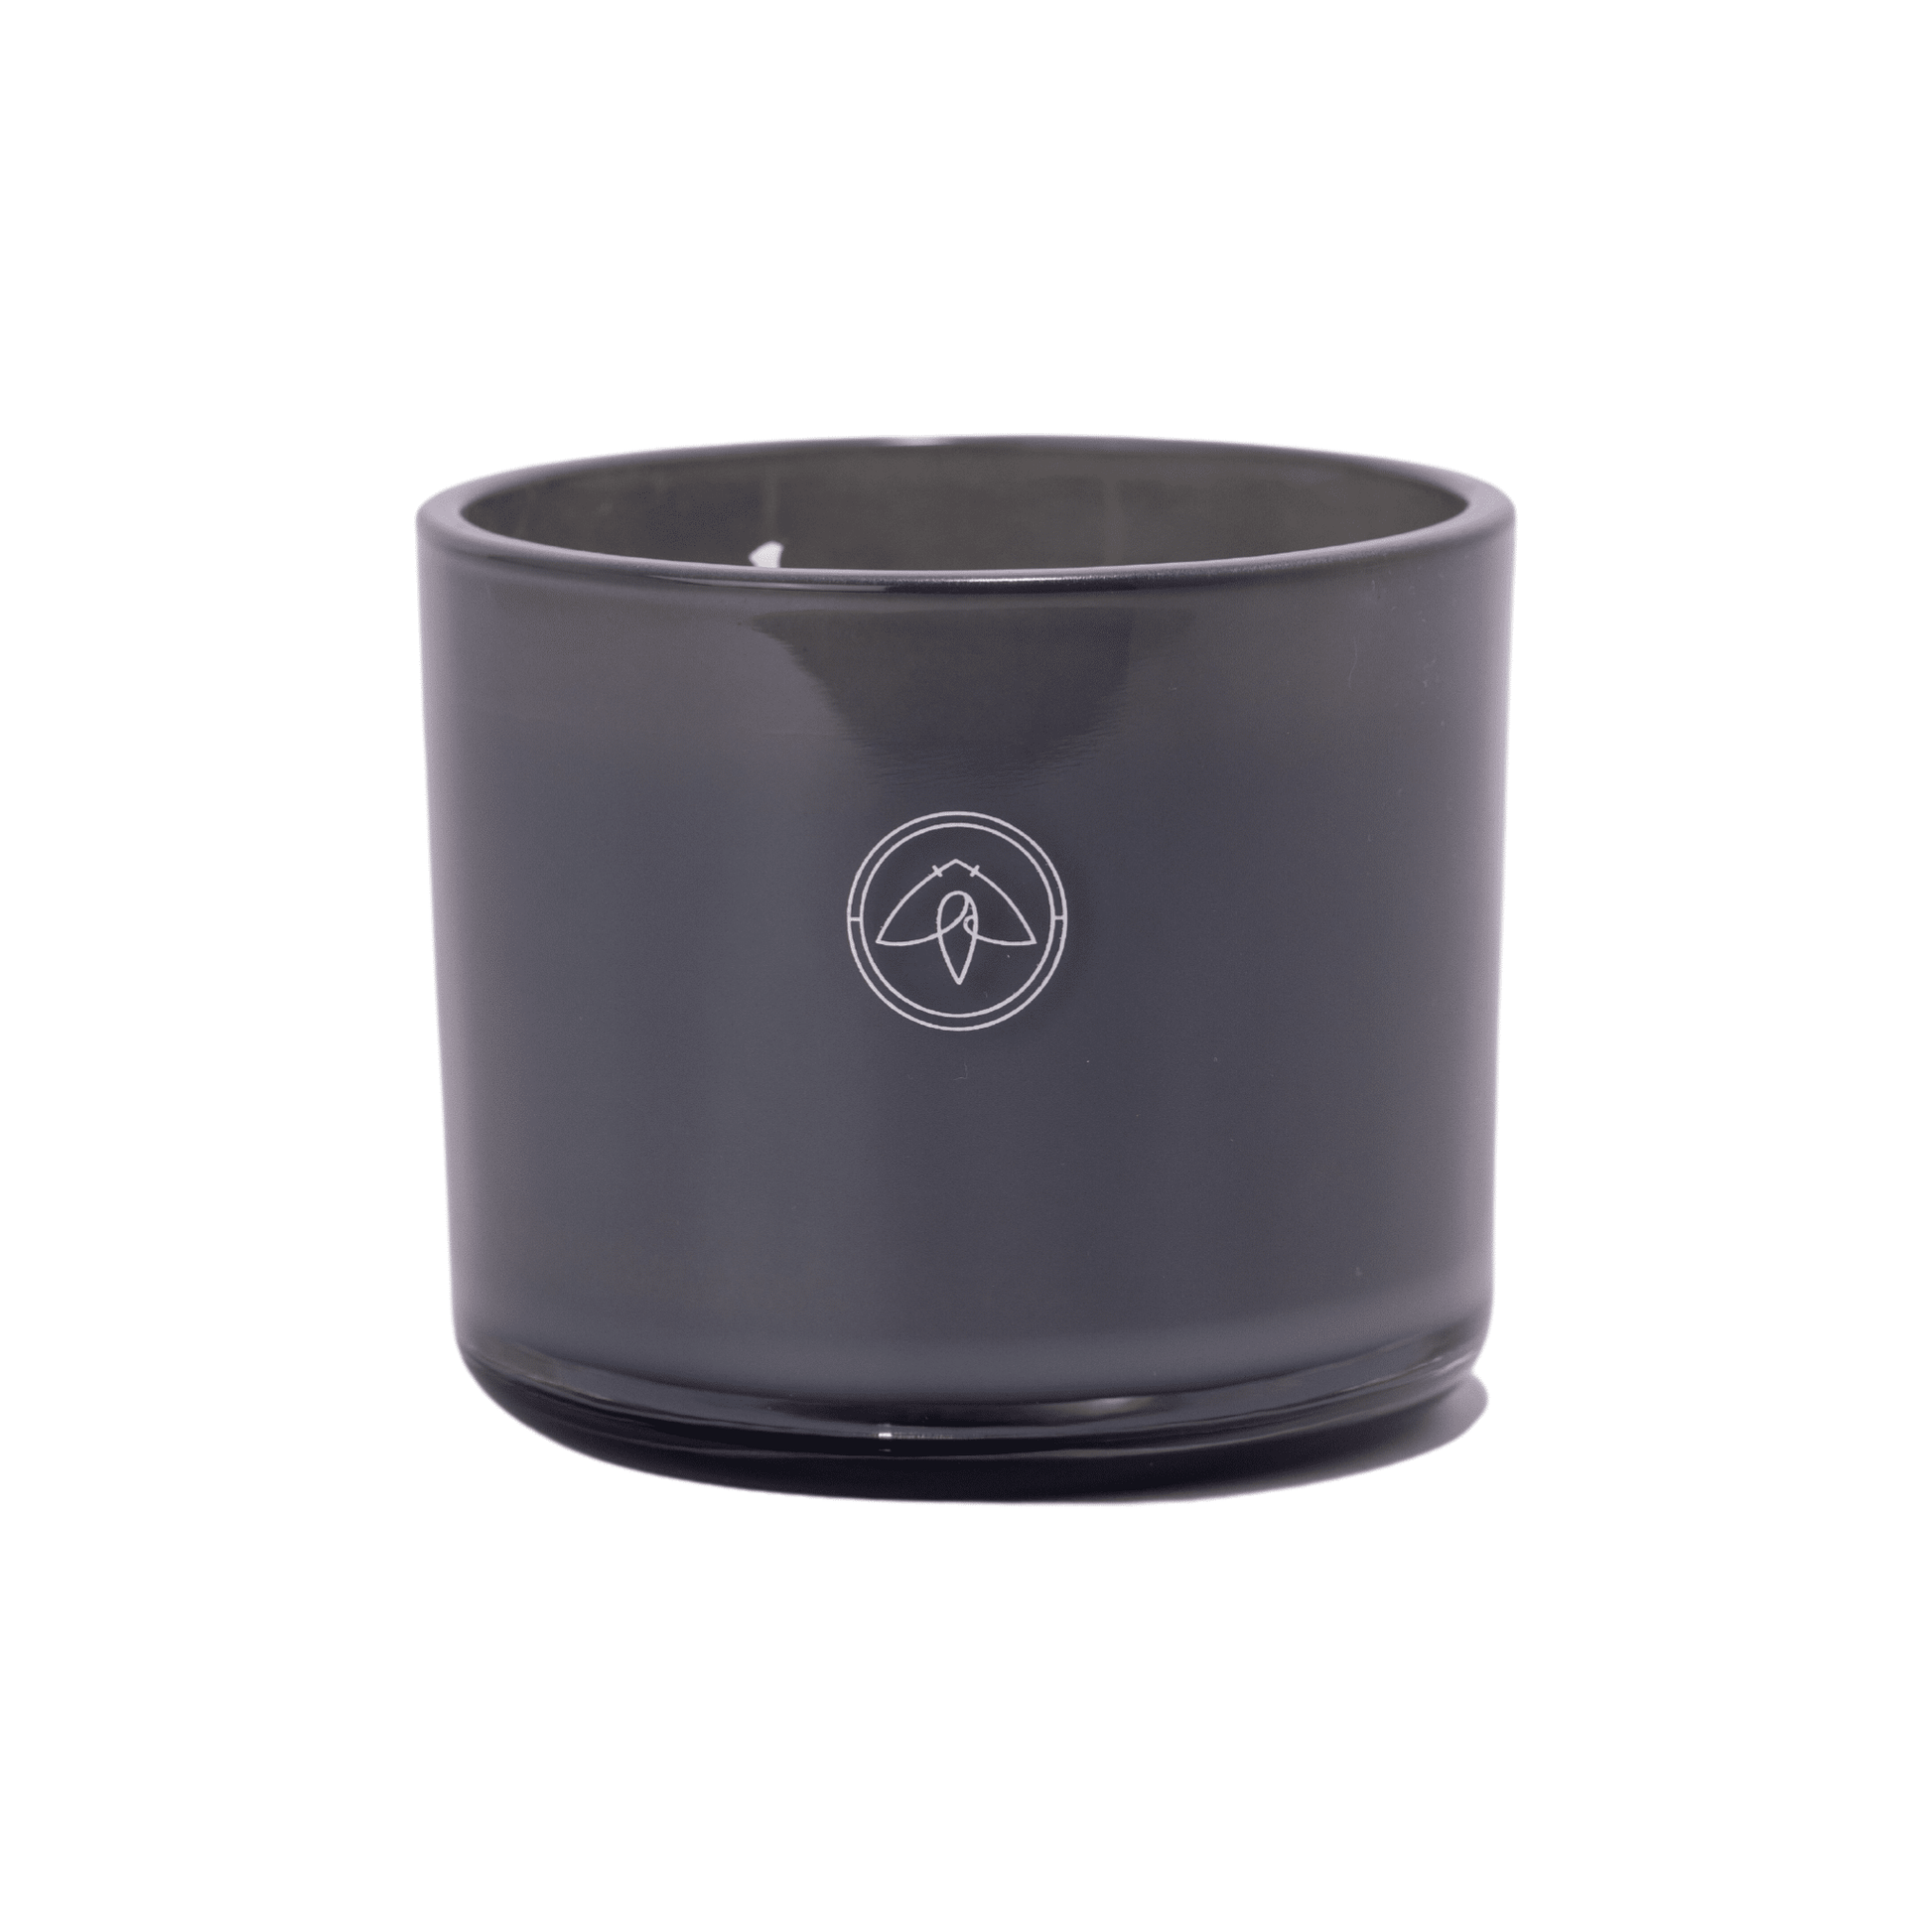 Products Serenity 10oz. Candle - Firefly by Paddywax - Bamboo Breeze unlit two wick candle on white background